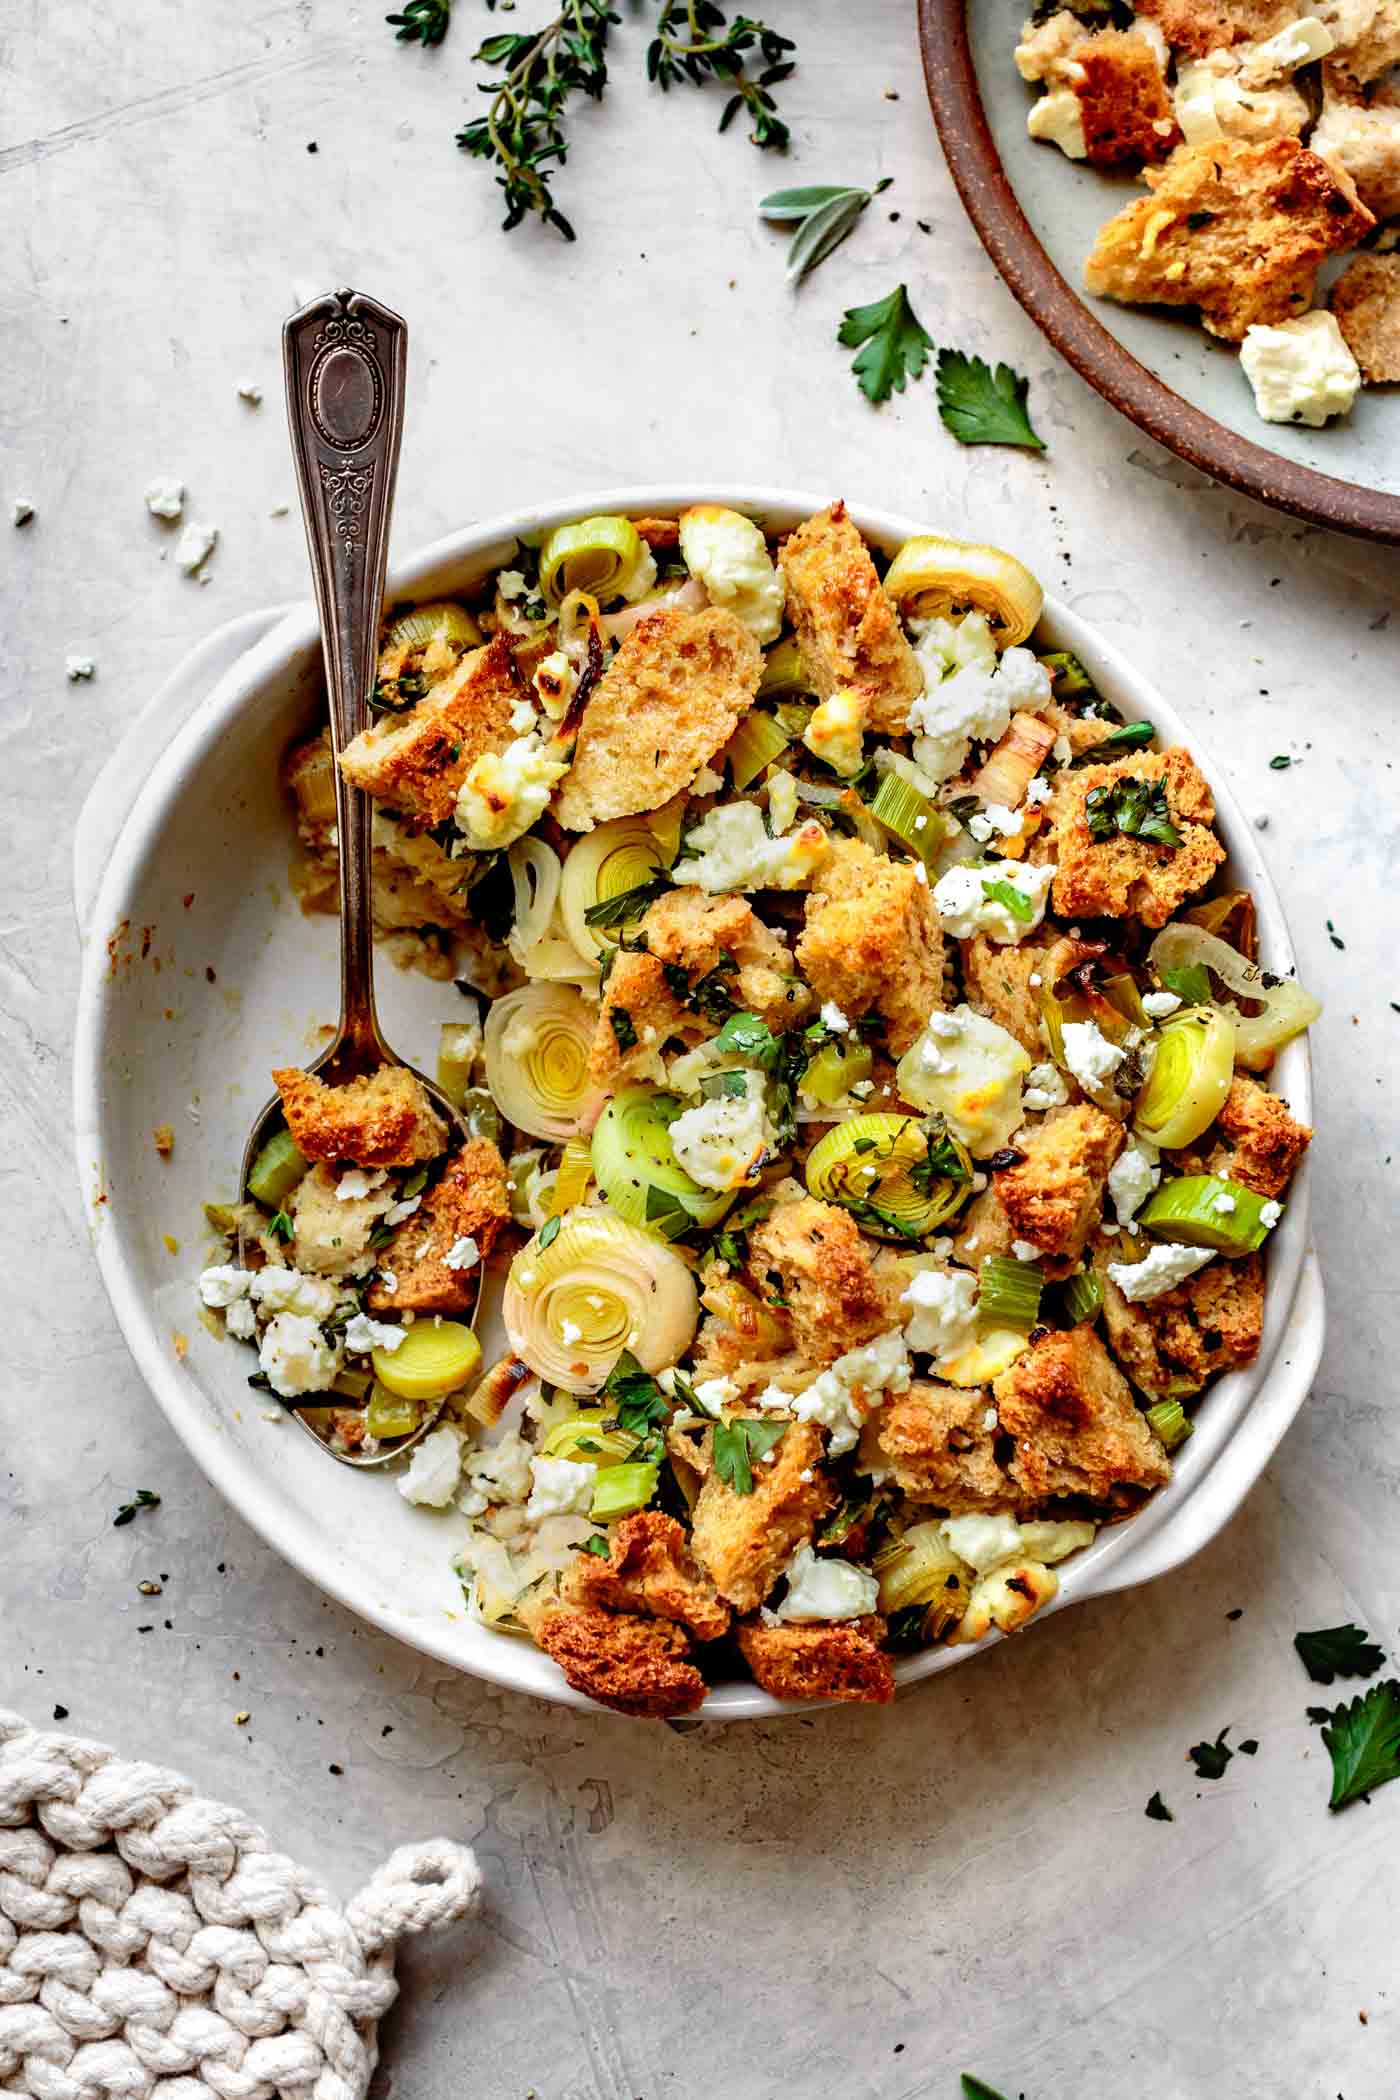 GF stuffing recipe with leeks and goat cheese in a pan